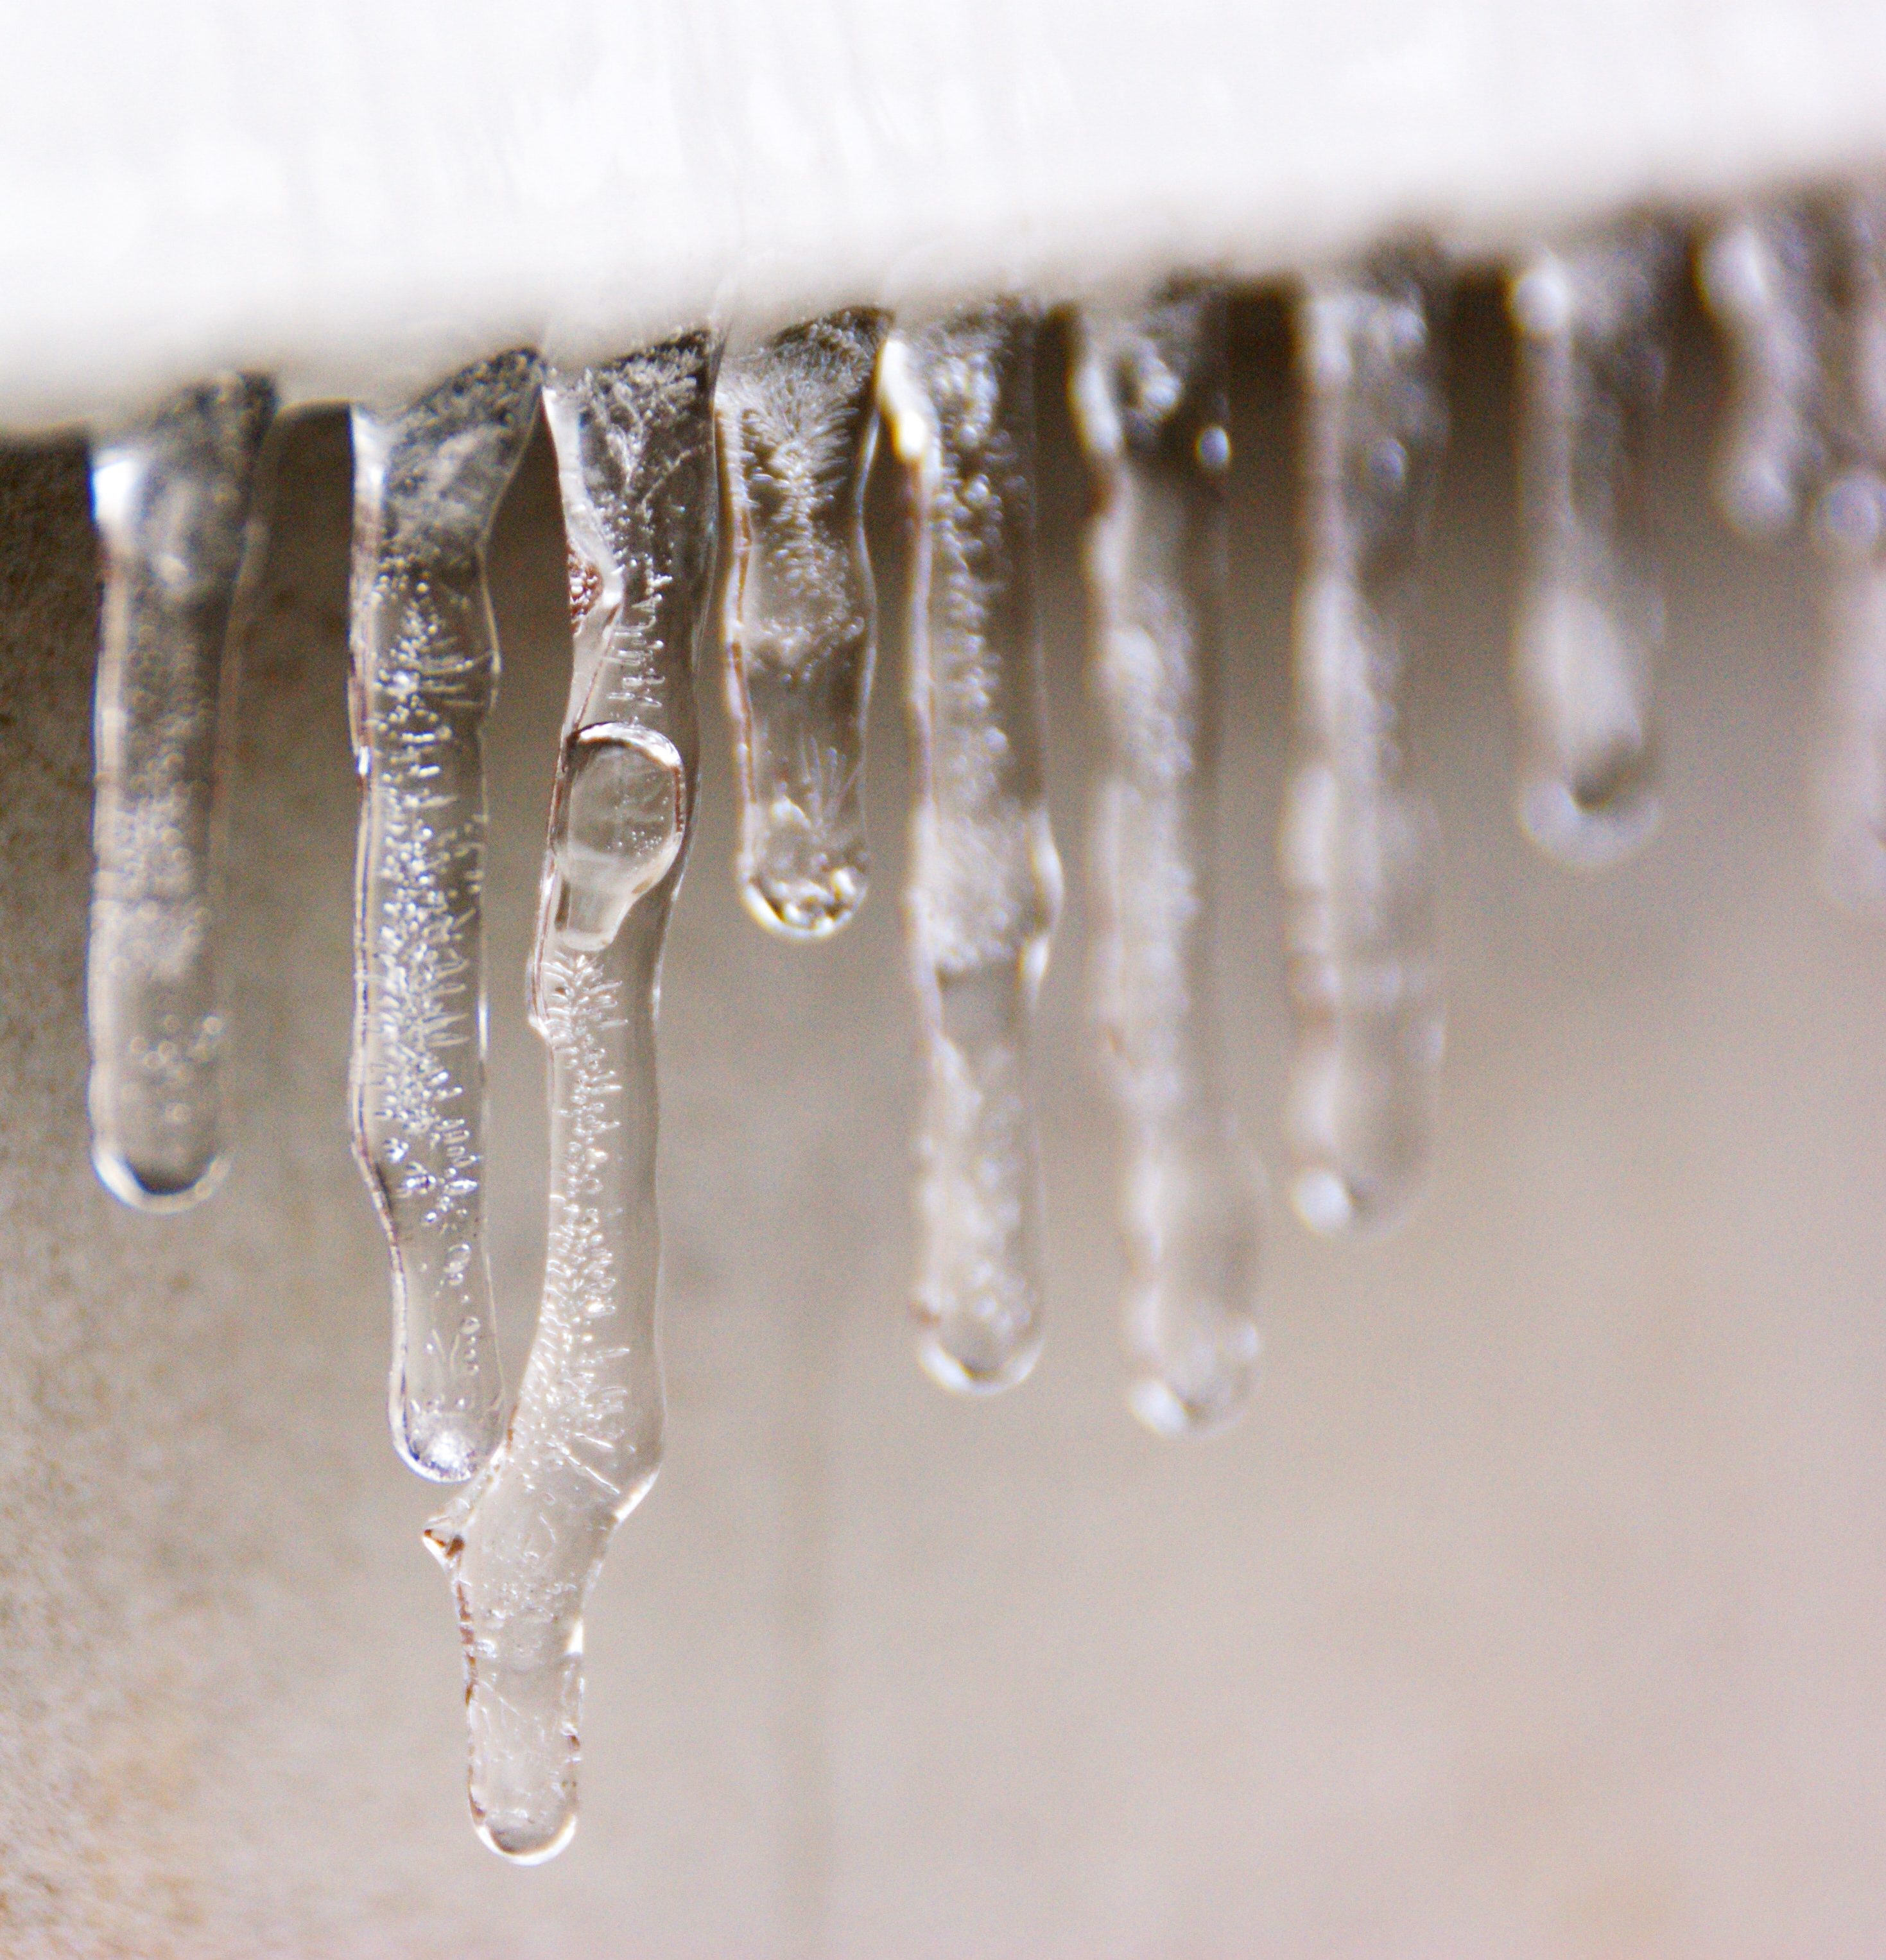 Great Tips to Keep Pipes From Freezing